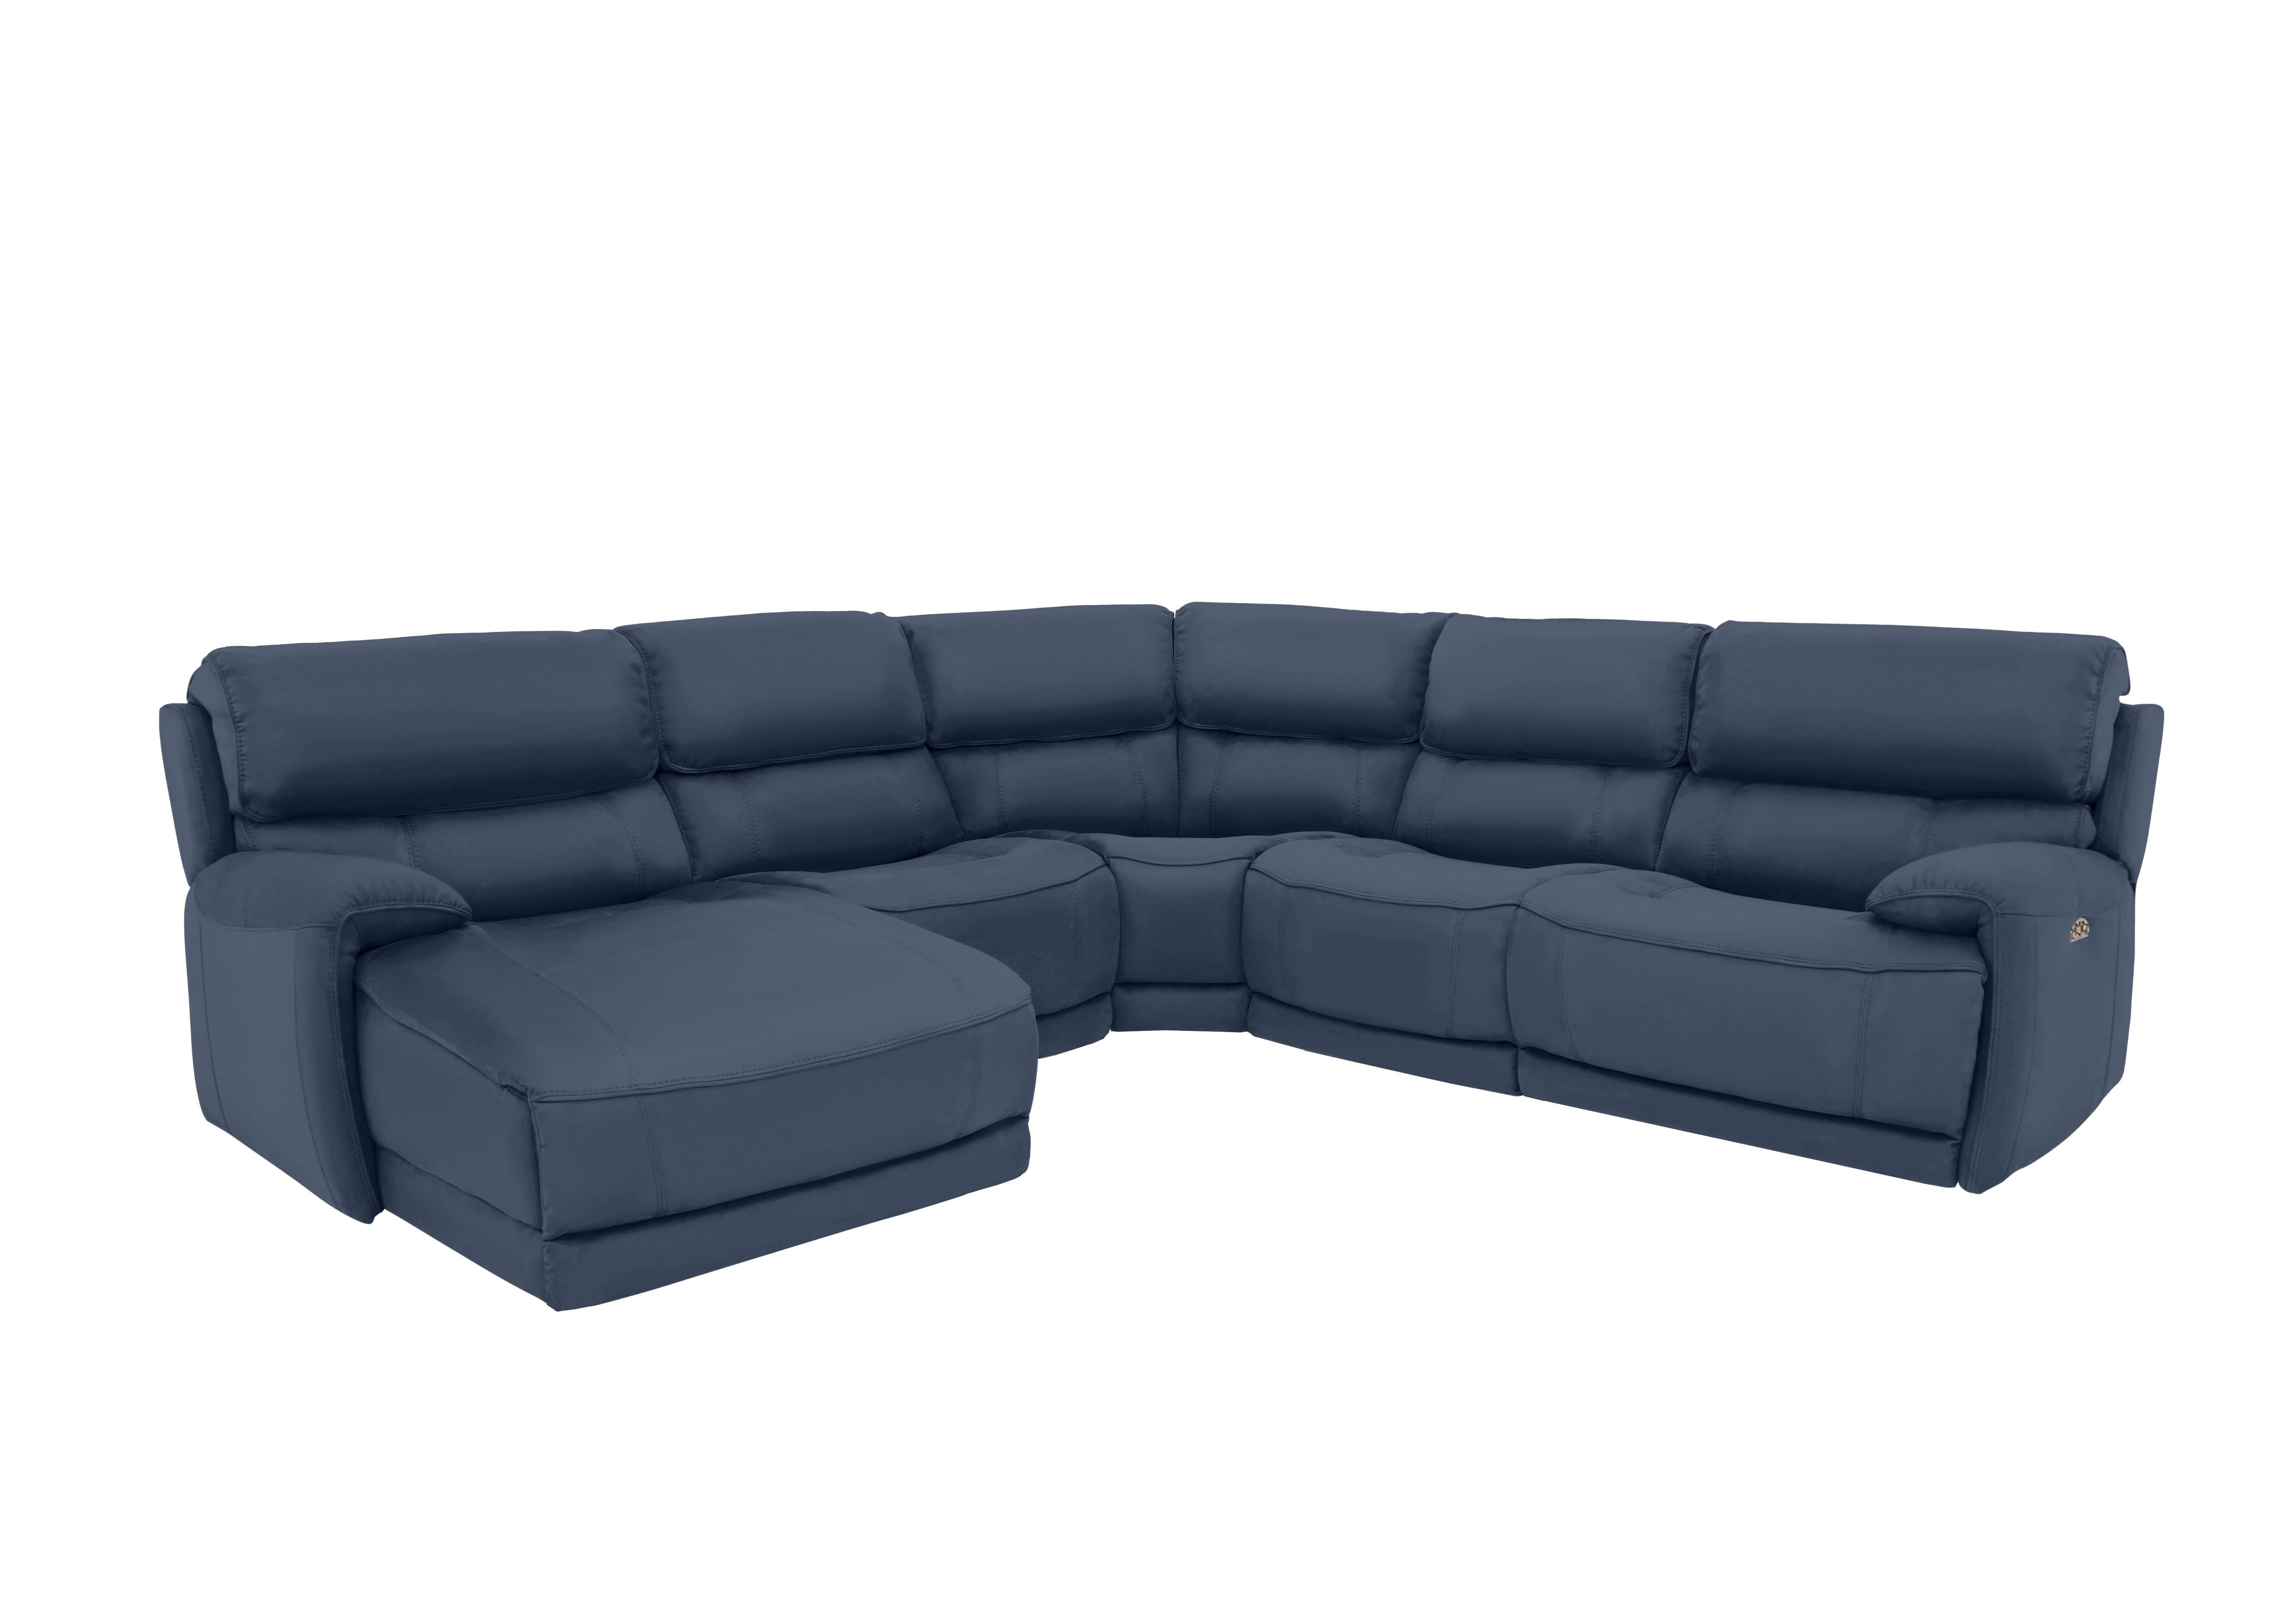 Link Leather Corner Chaise Power Sofa in Bv-313e Ocean Blue on Furniture Village